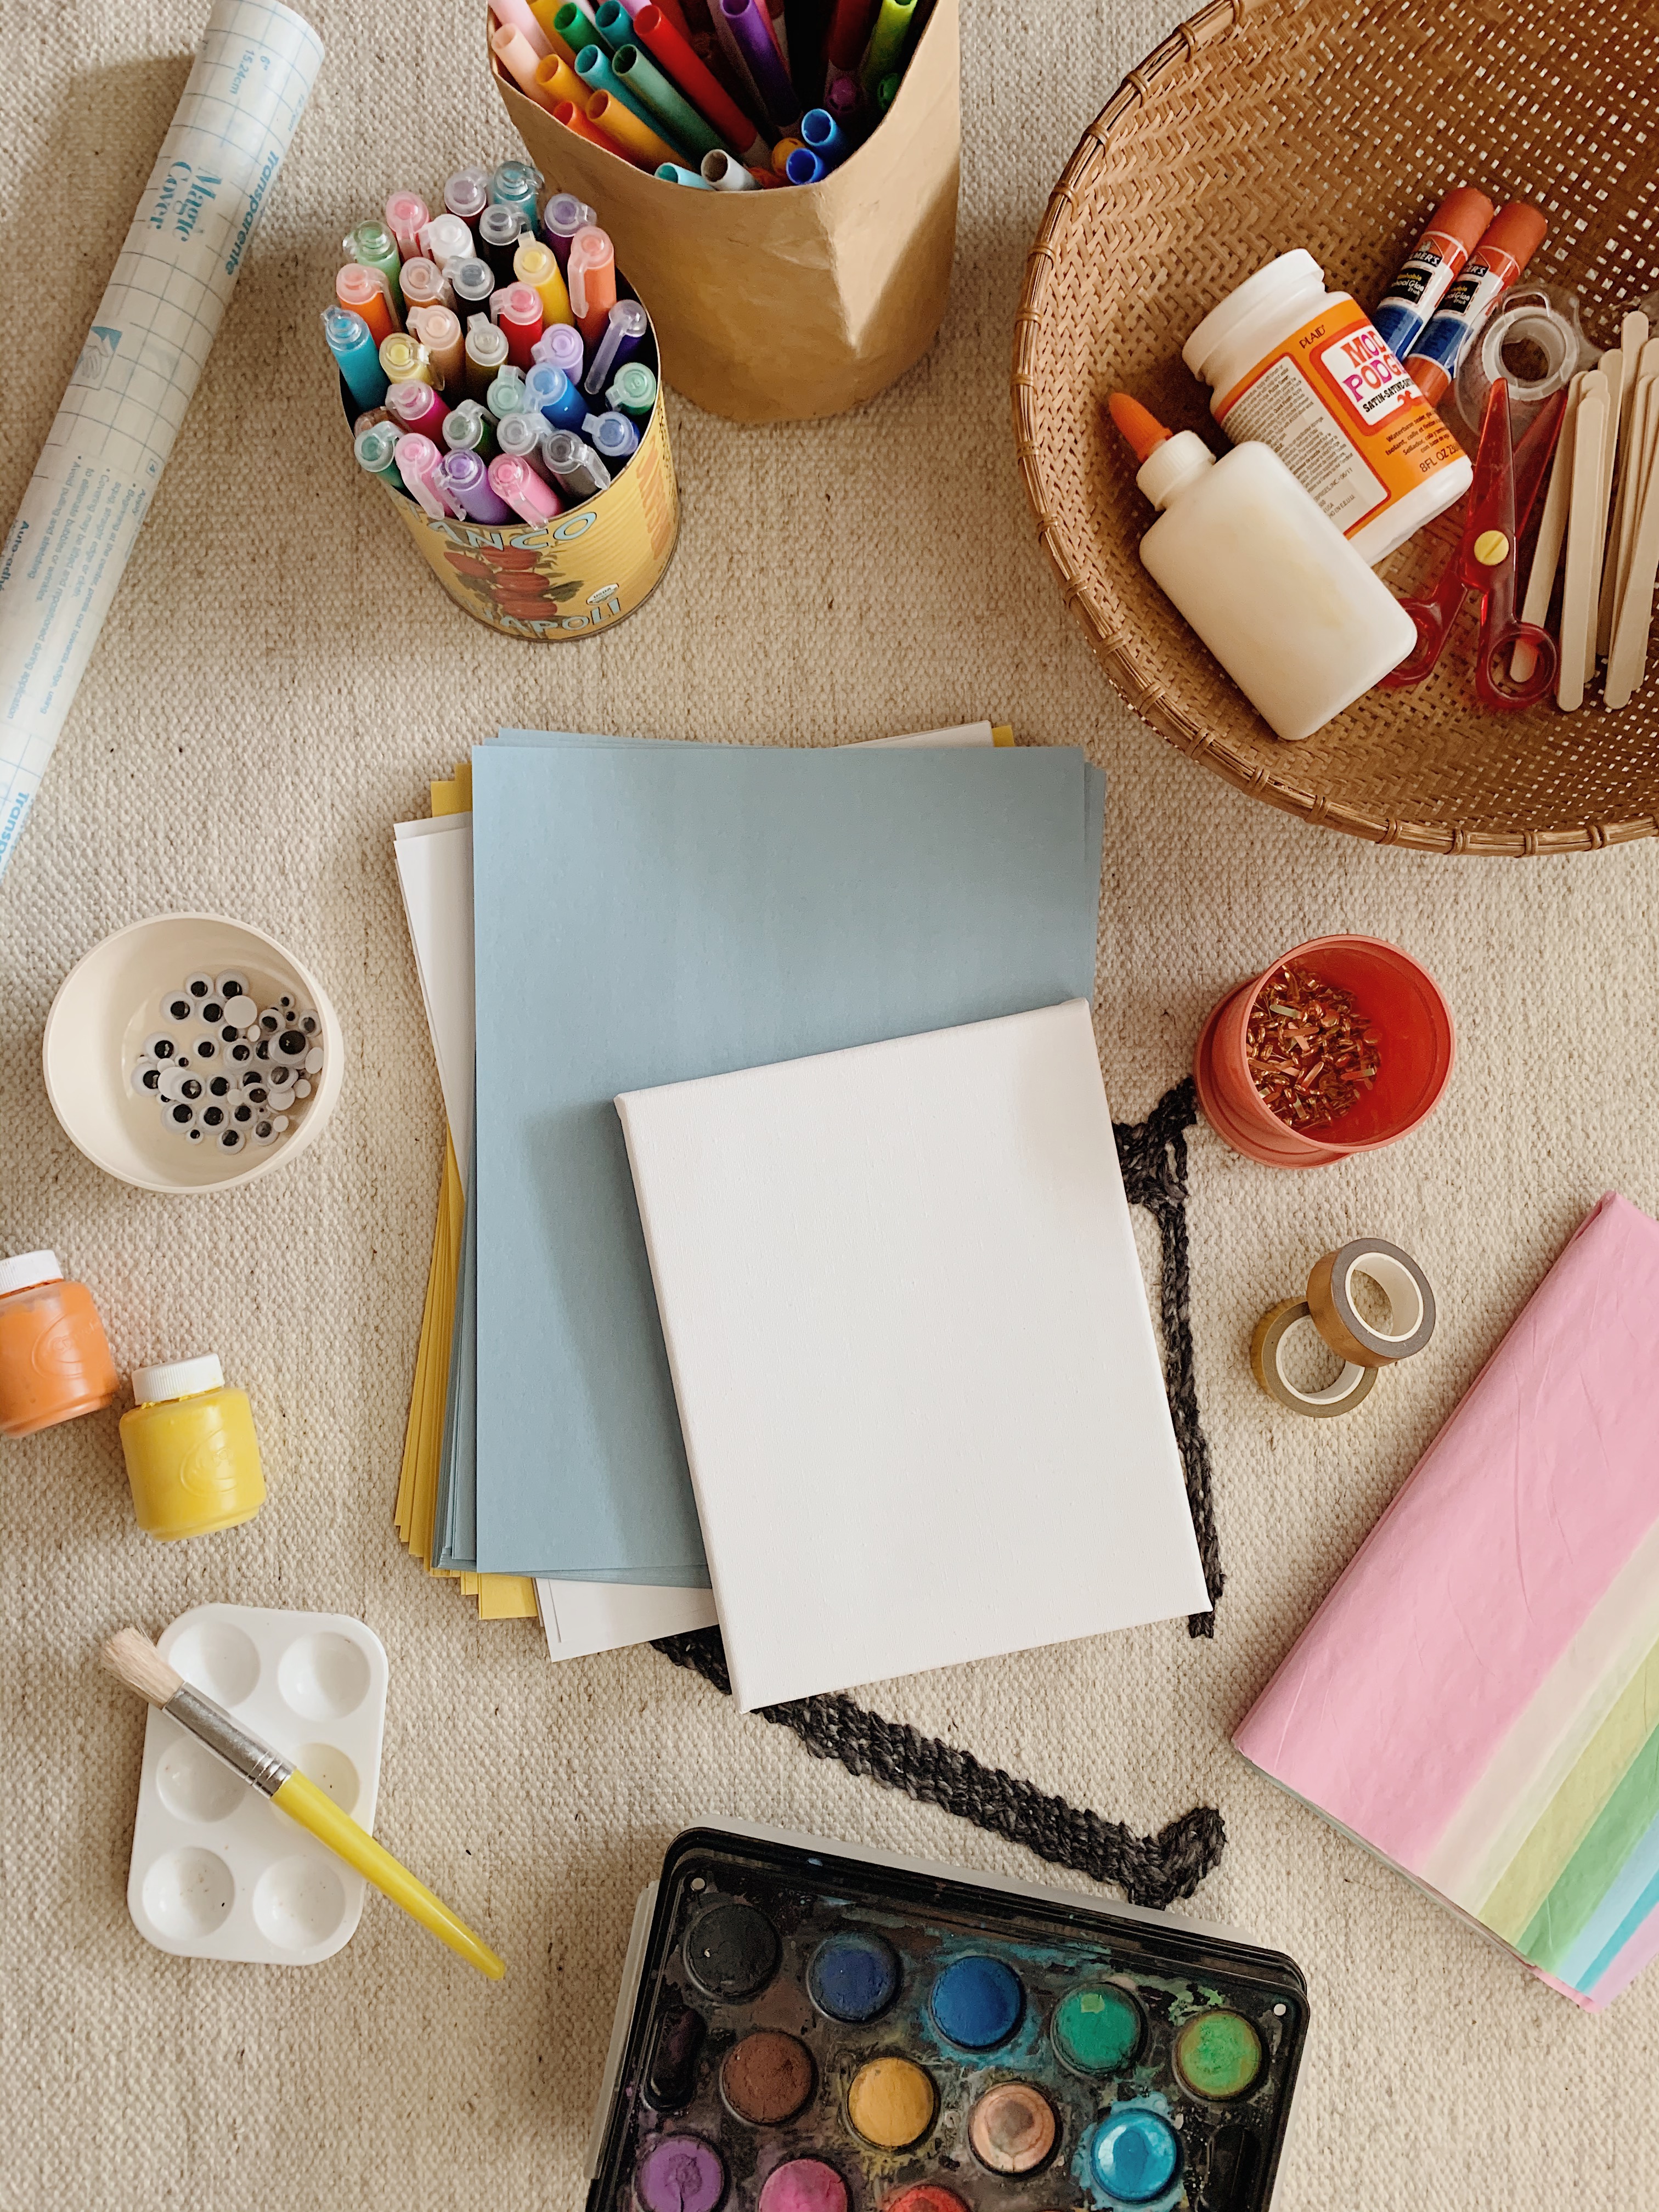 the craft supplies we're using – almost makes perfect